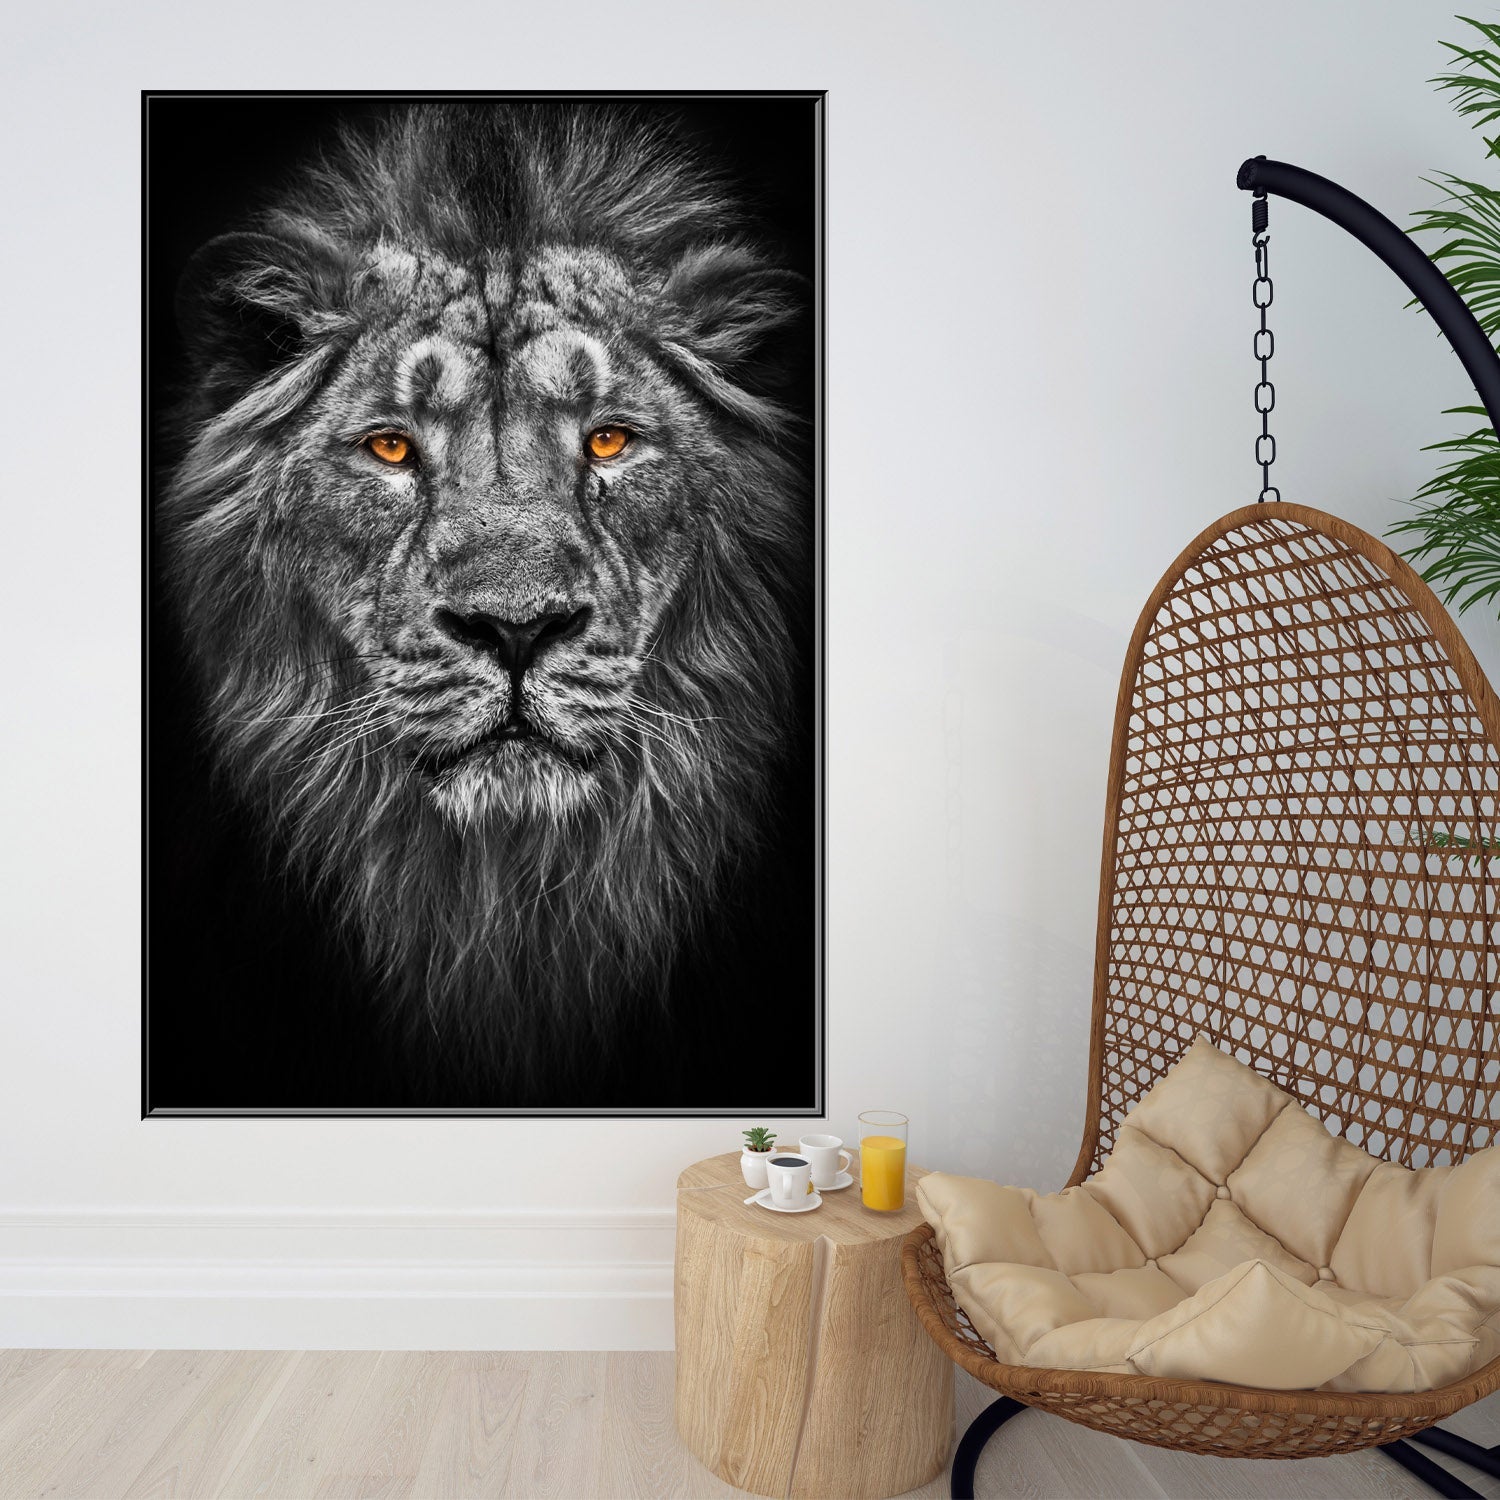 https://cdn.shopify.com/s/files/1/0387/9986/8044/products/LionwithOrangeEyesCanvasArtprintStretched-4.jpg